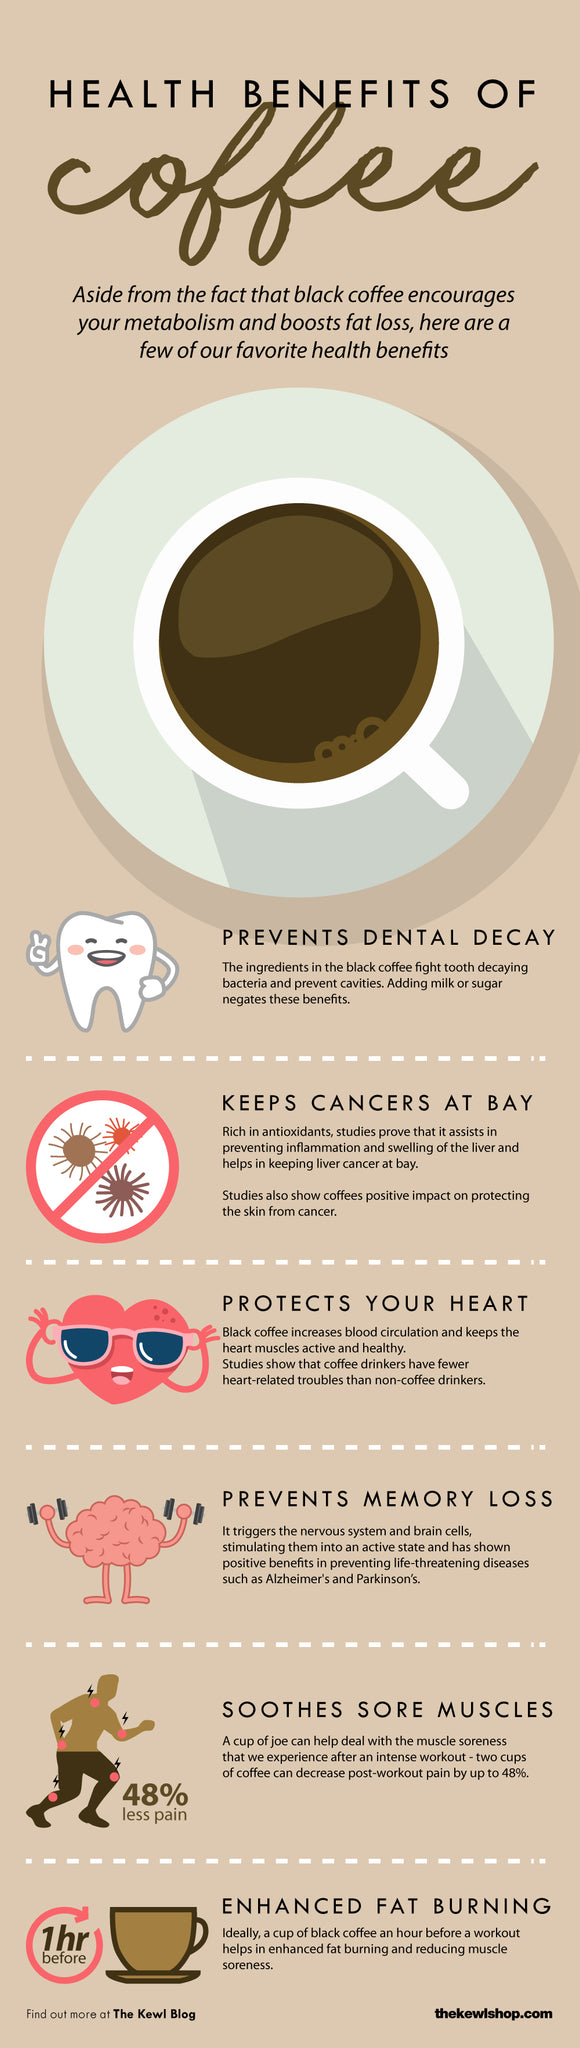 Can Coffee Uptick Your Metabolism and Help You Burn Fat?, Infographic